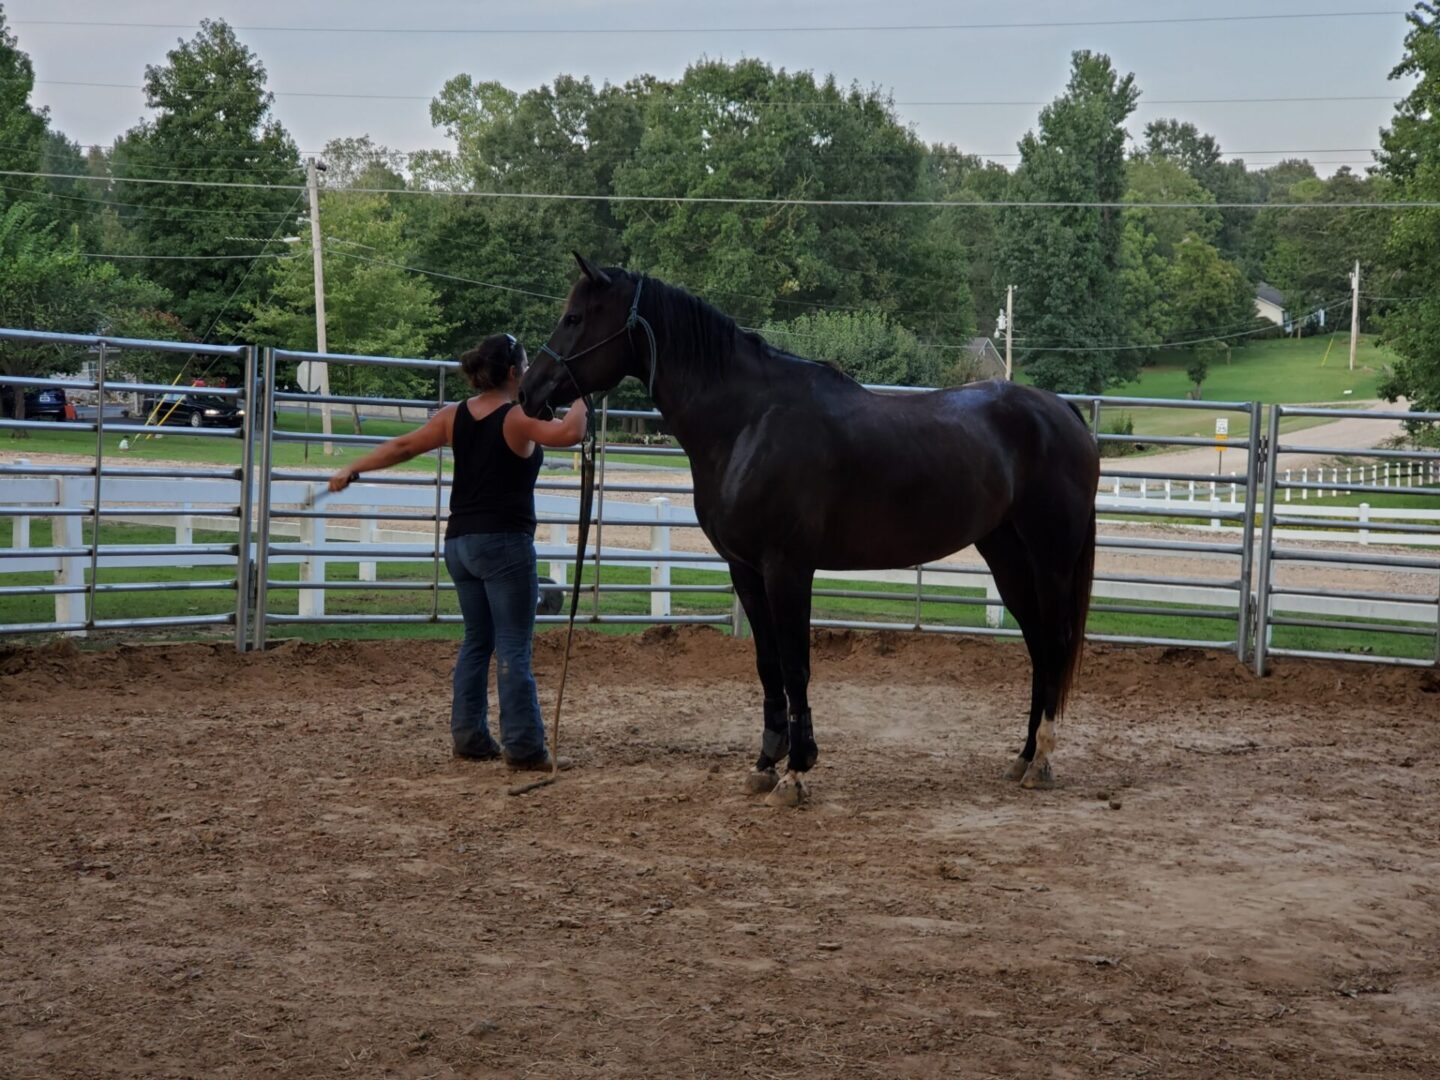 A black horse being trained